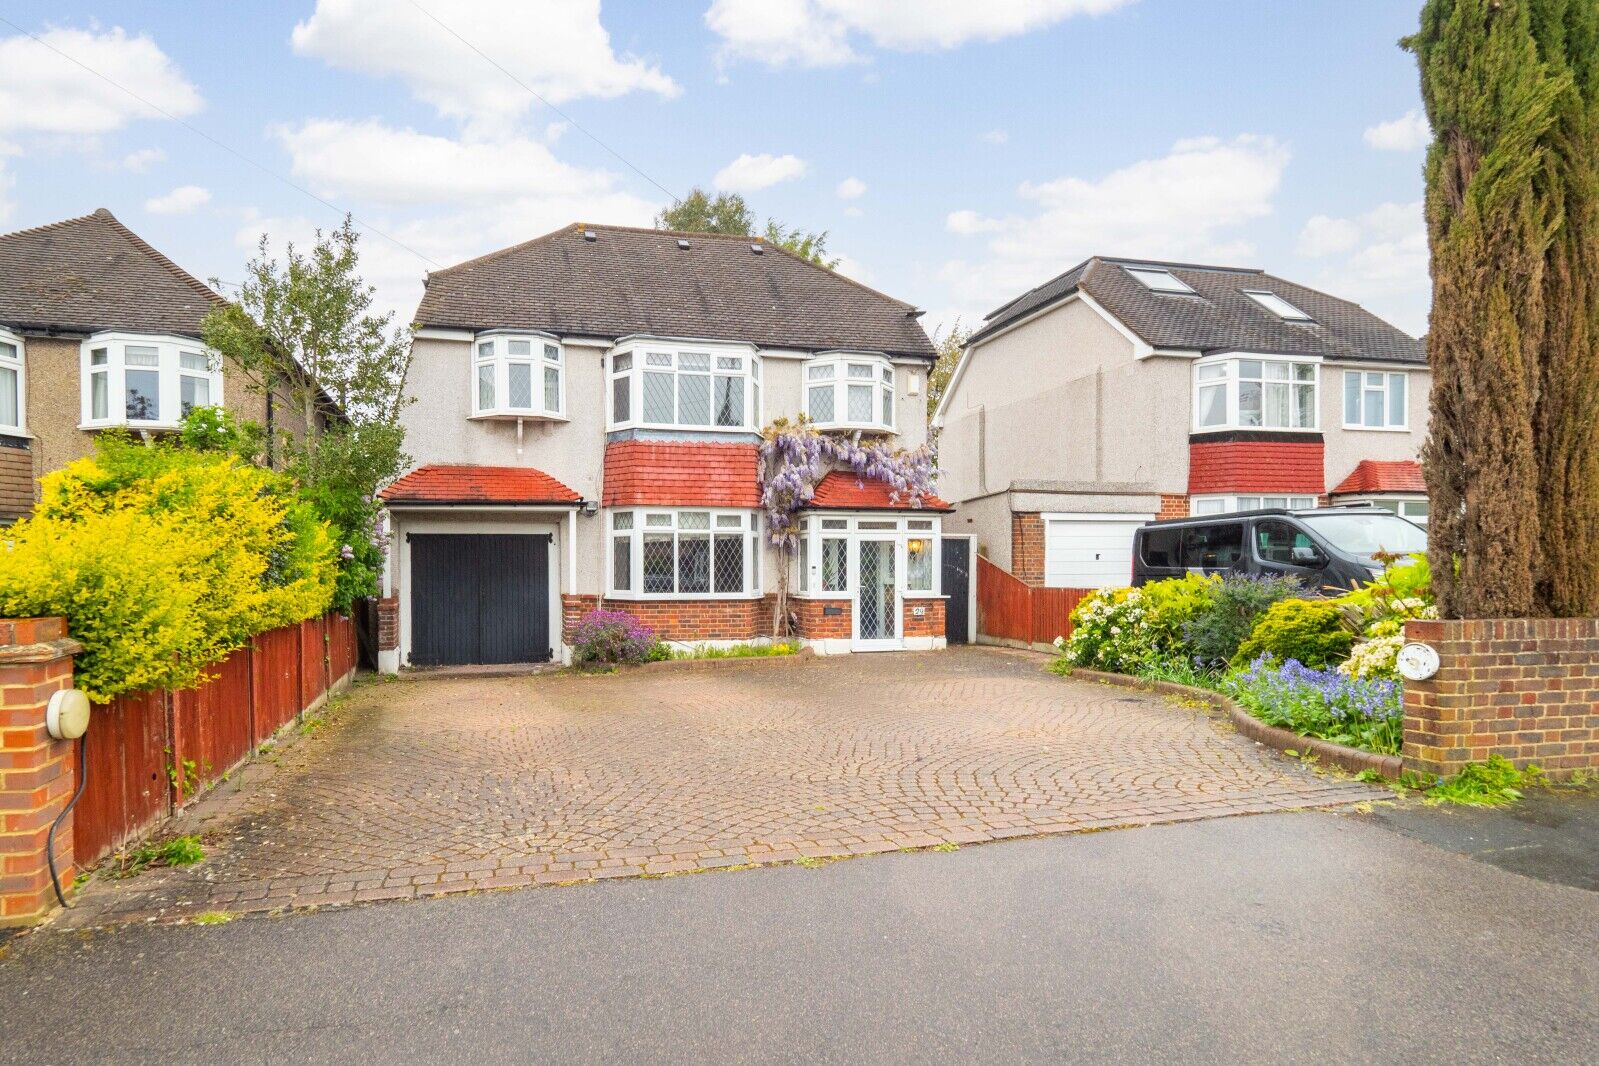 5 bedroom detached house for sale Northey Avenue, Cheam, SM2, main image